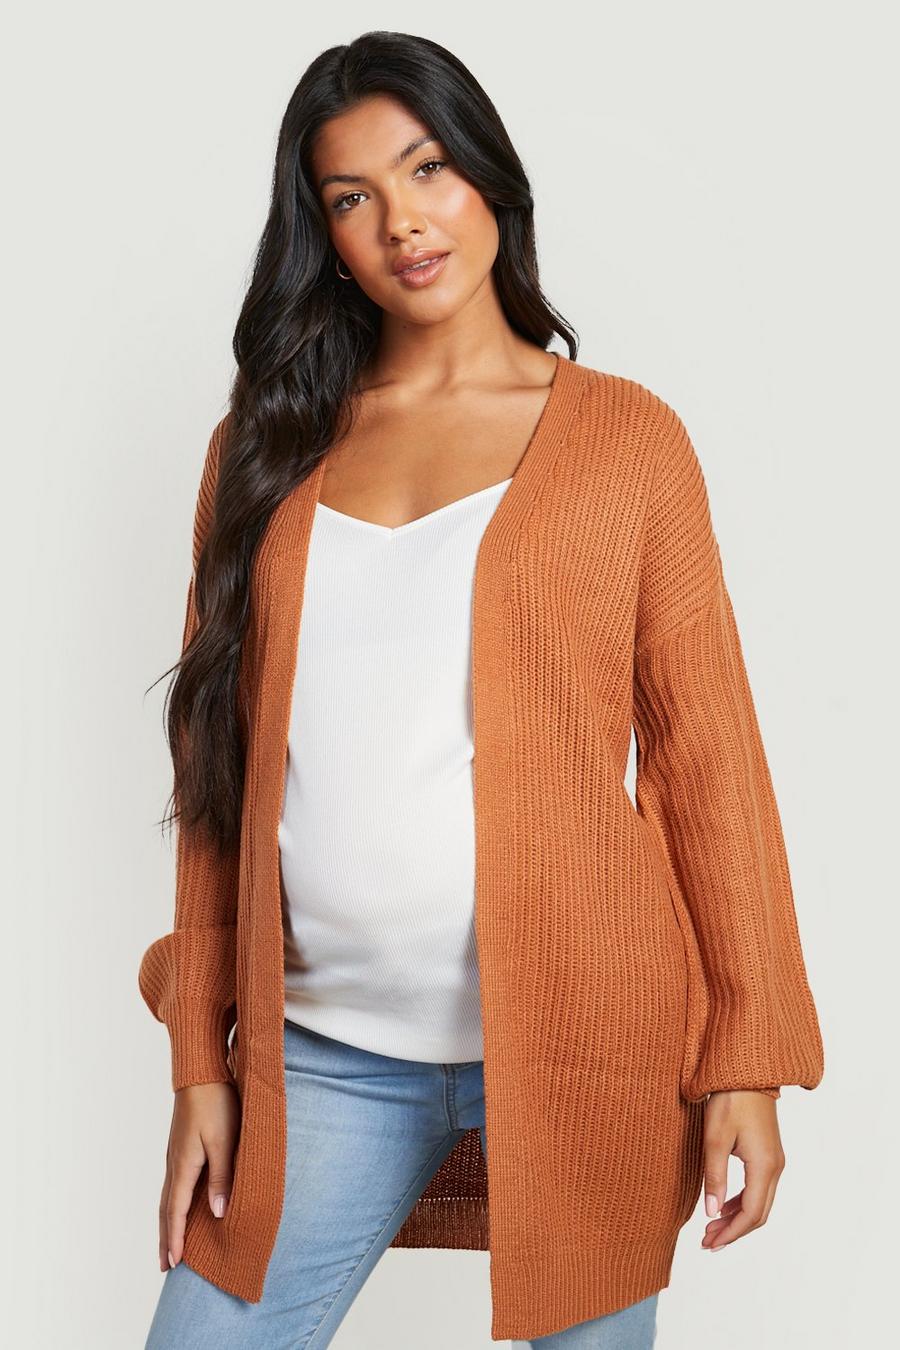 Copper orange Maternity Bell Sleeve Knitted Cardigan